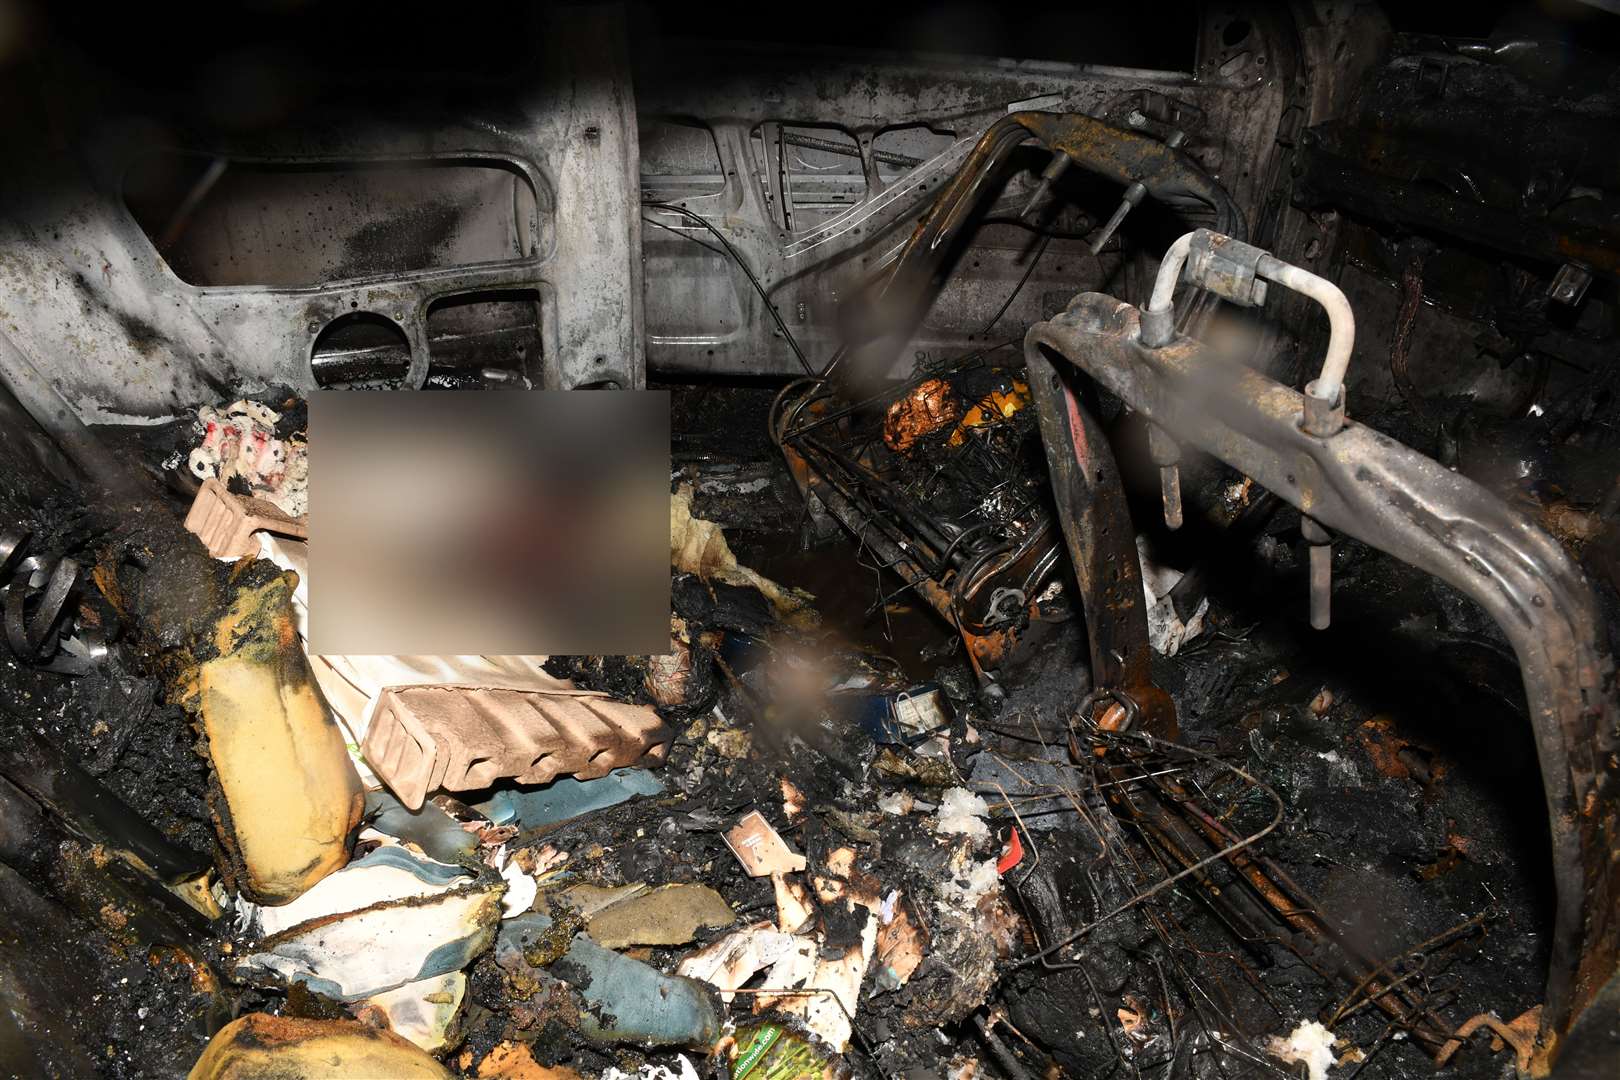 The court was told items belonging to Marten were found in the burnt out vehicle (Metropolitan Police/PA)